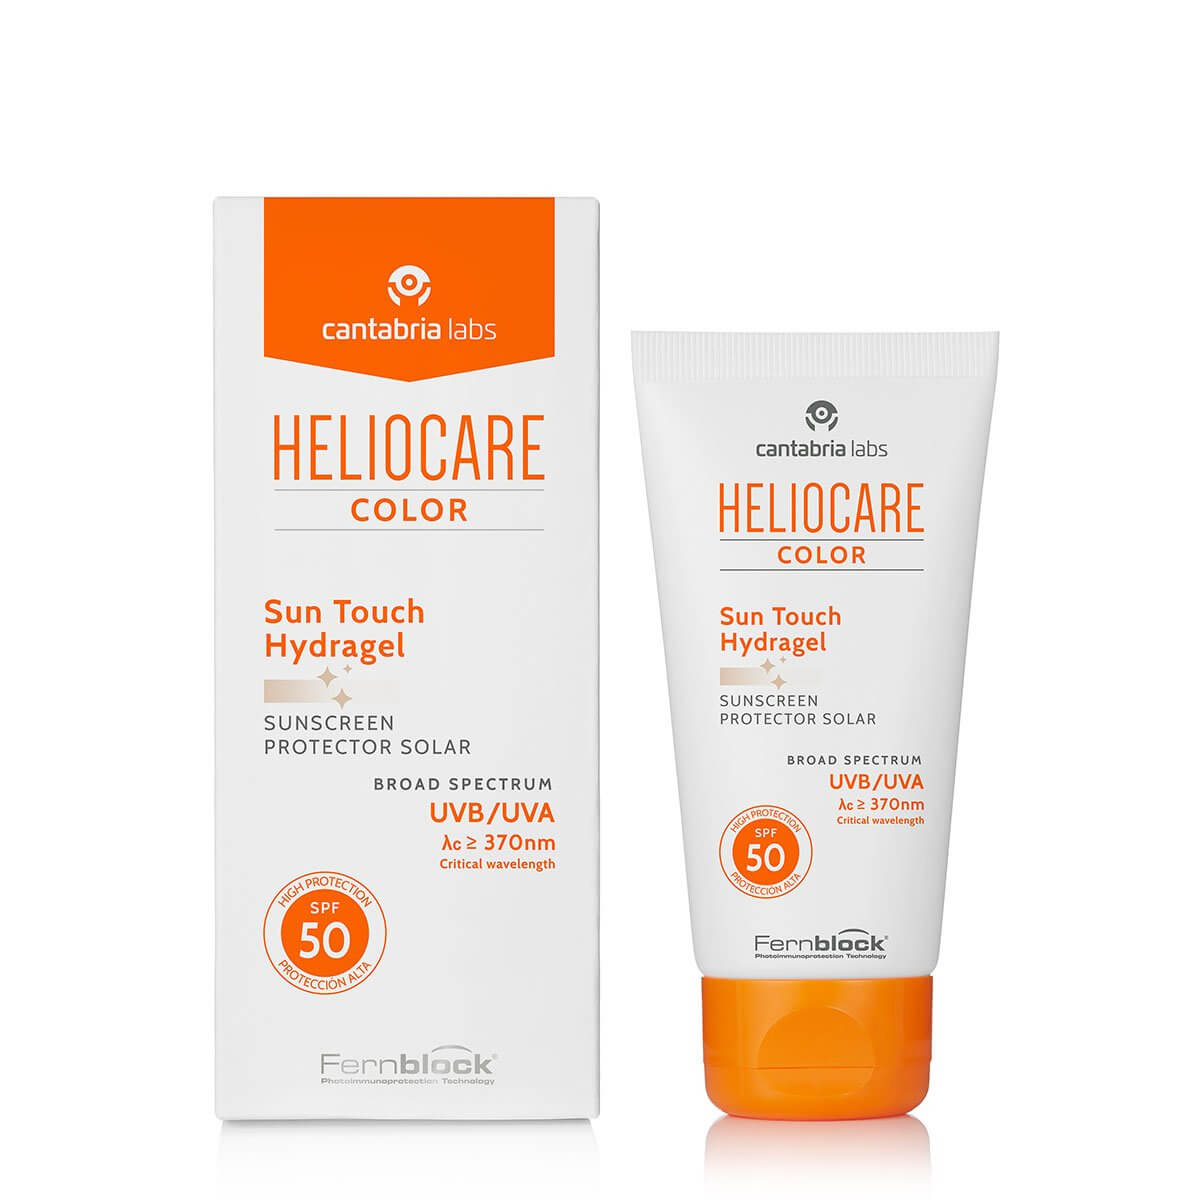 Heliocare Sun Touch Hydragel